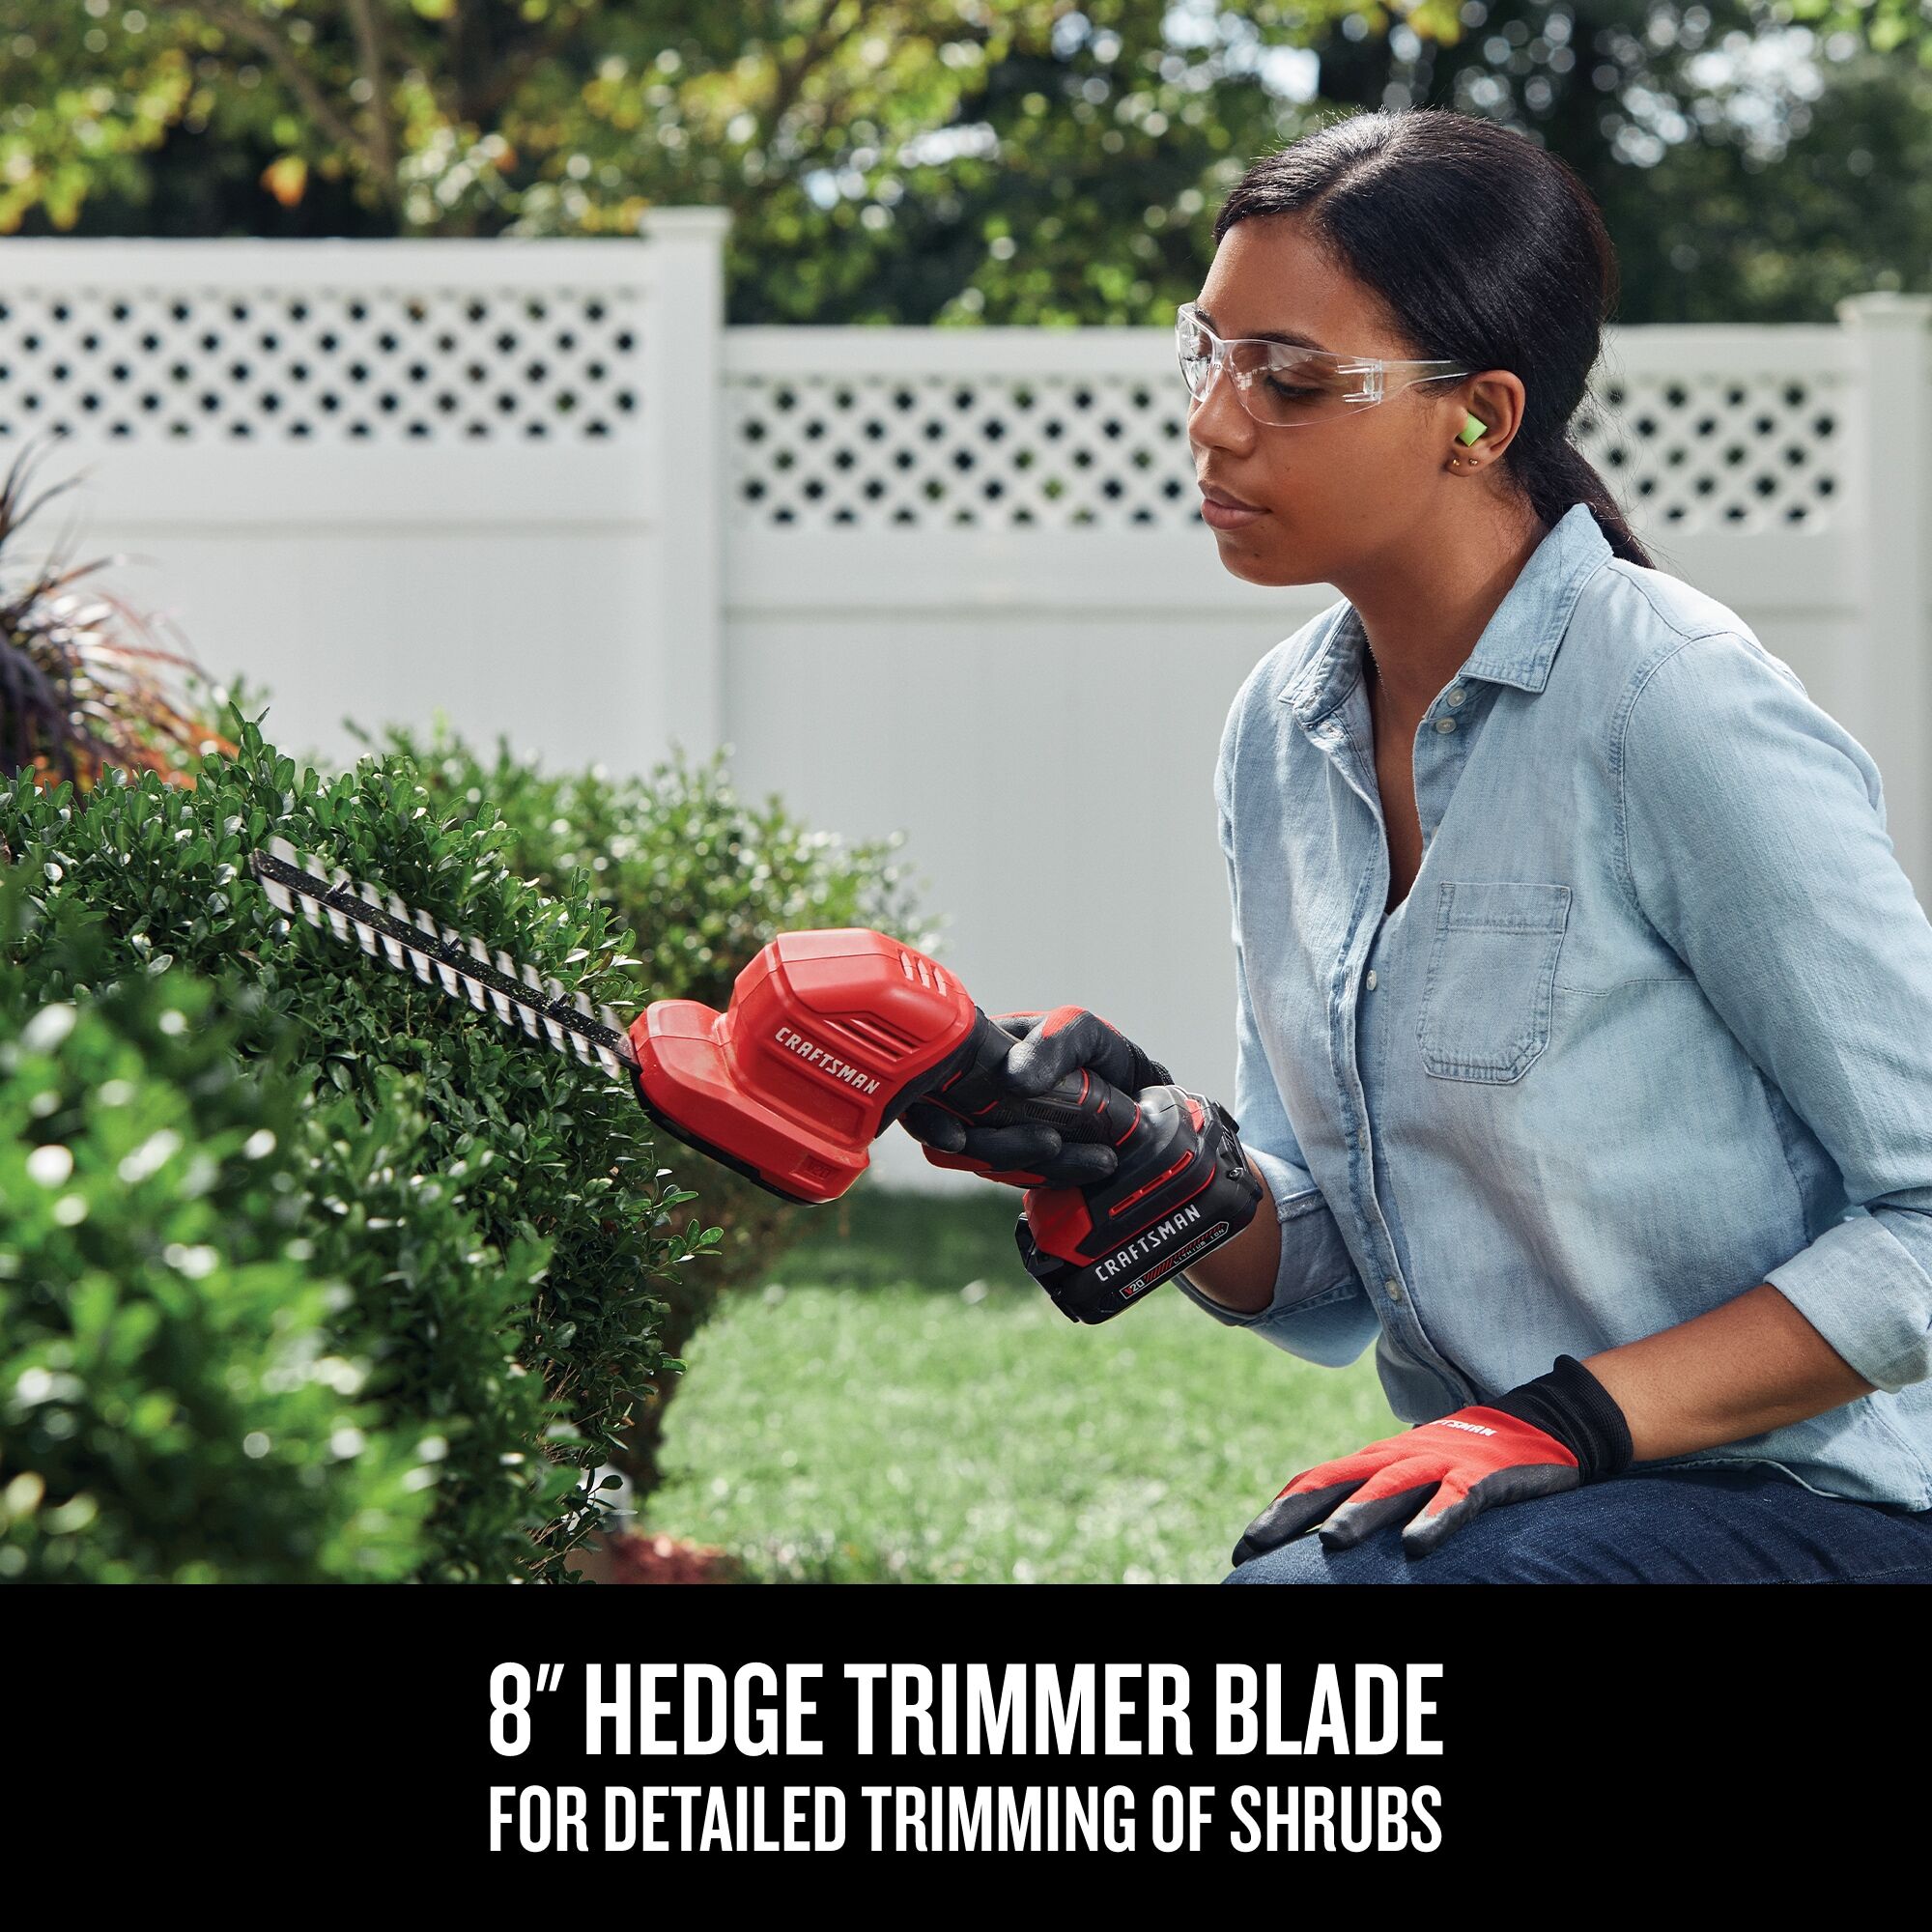 Graphic of CRAFTSMAN Hedge Trimmers highlighting product features